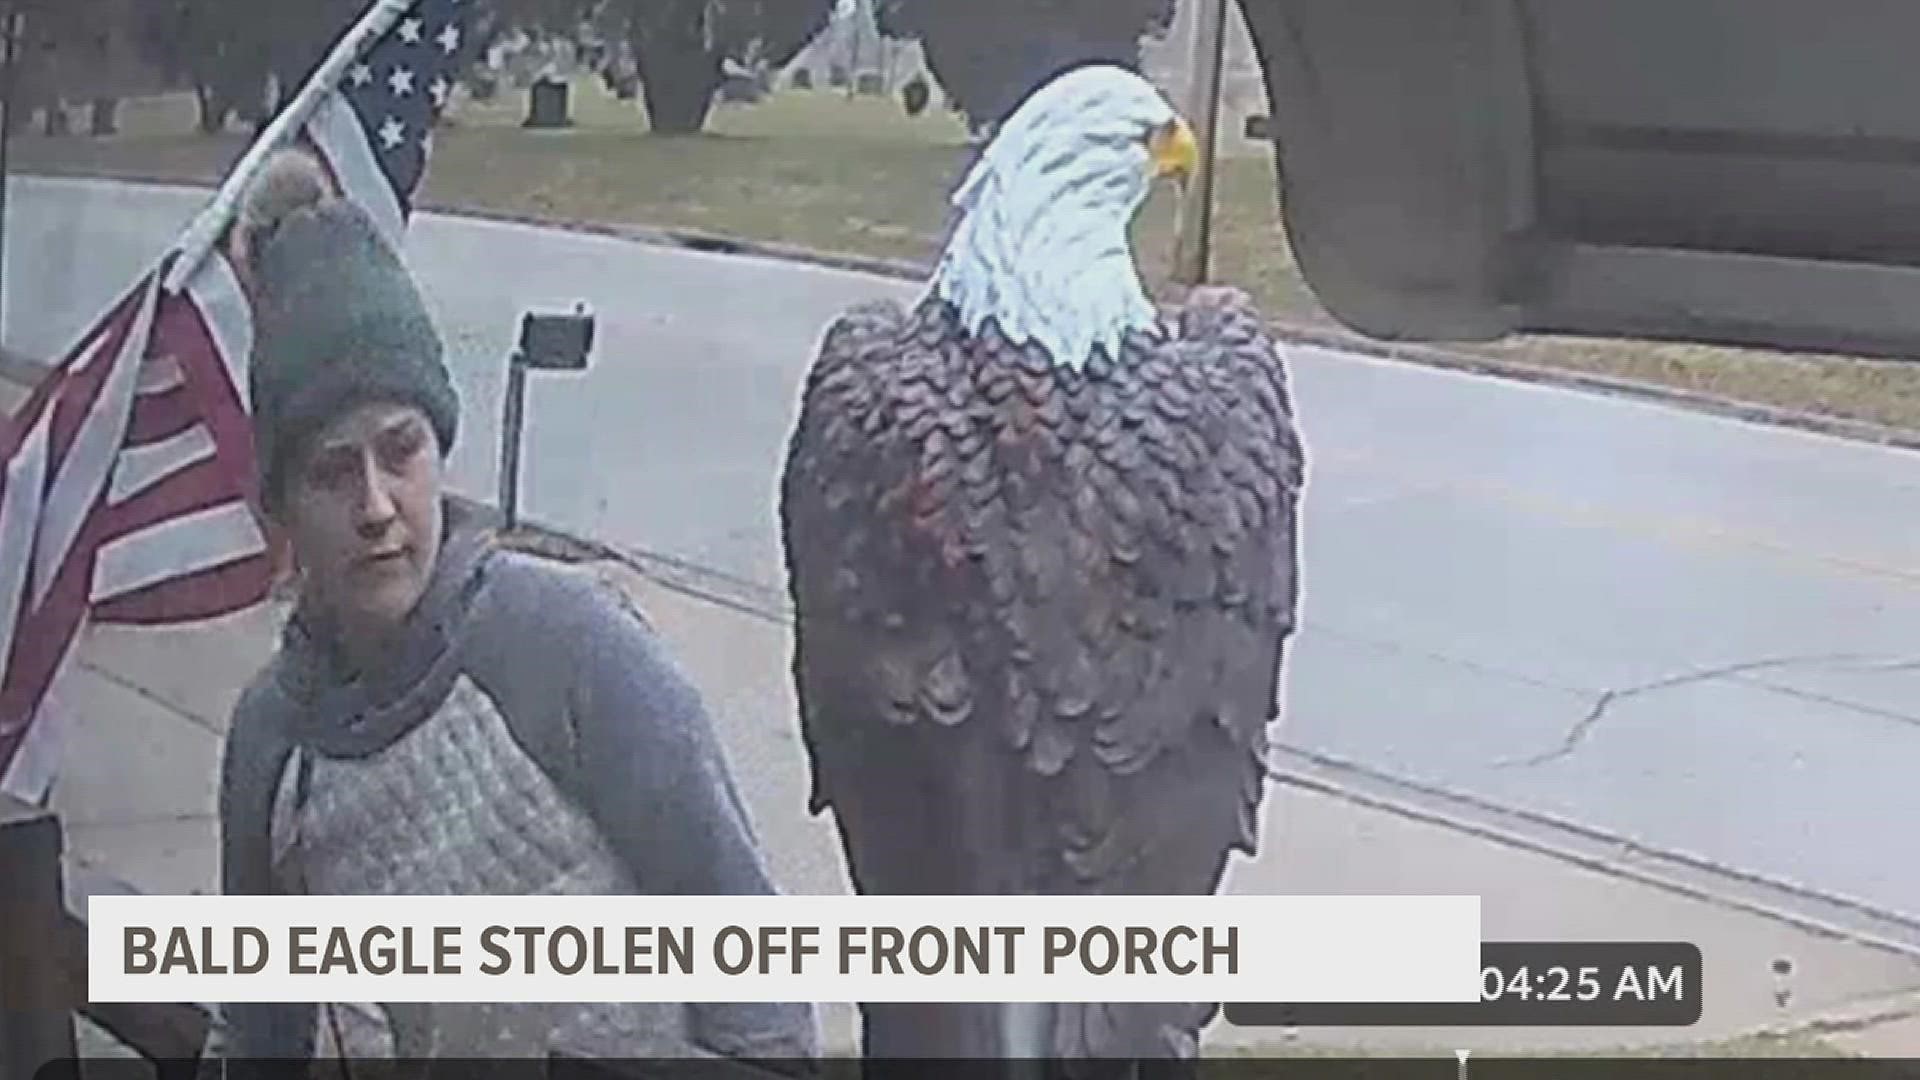 The pair were recorded using a drill to steal a bald eagle statue off of a Rock Island porch. They were also seen with a blue Dodge Caravan with no front plate.